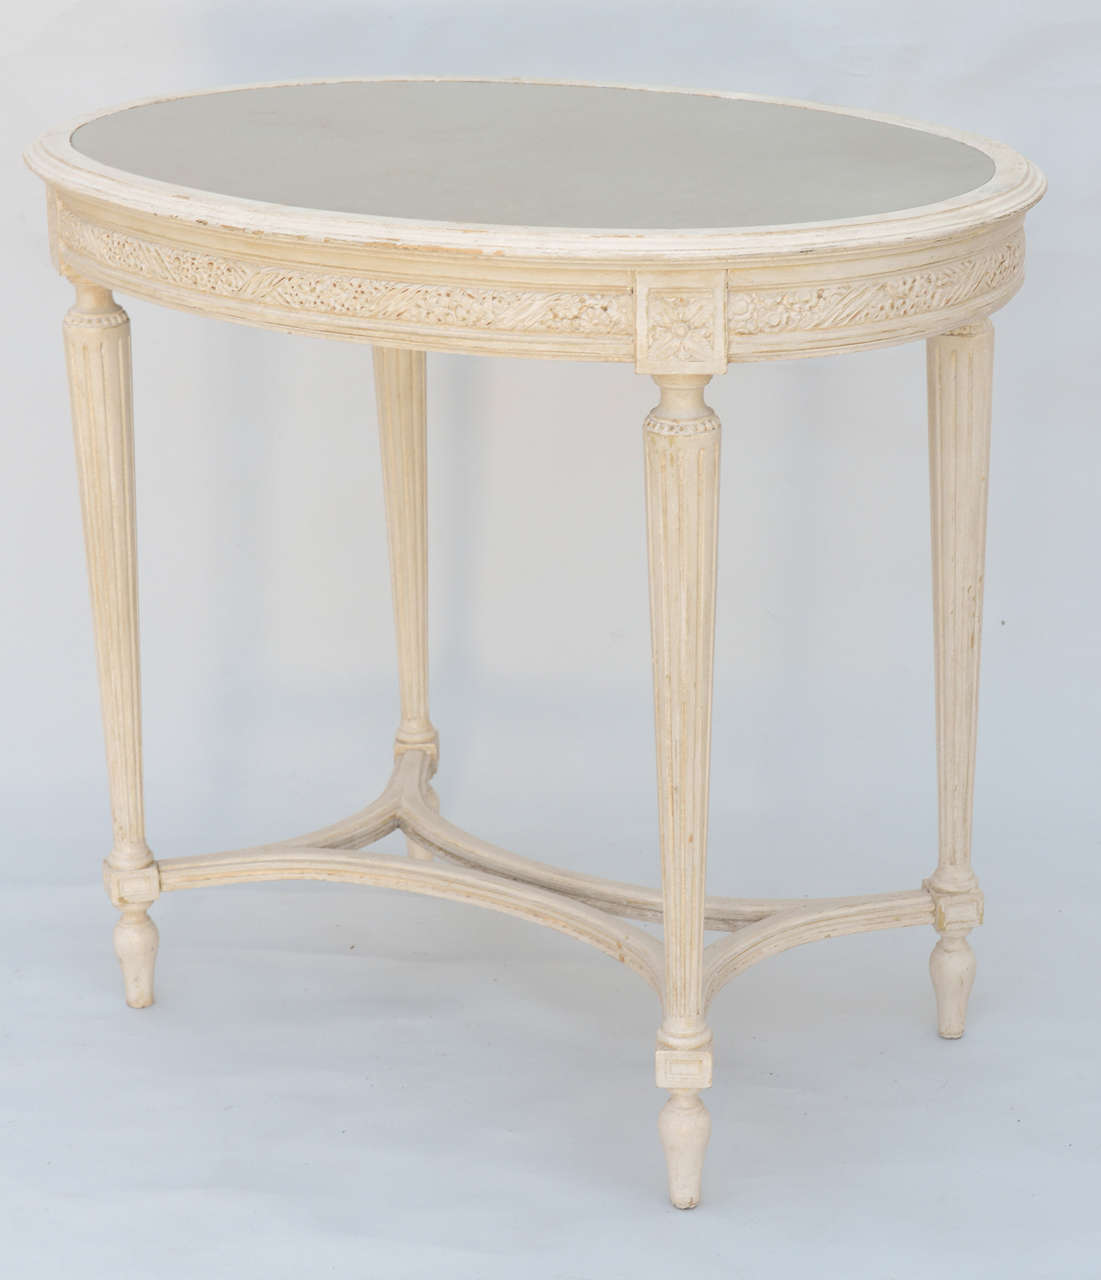 19th Century 19c. French Oval Accent Table with Mirrored Top